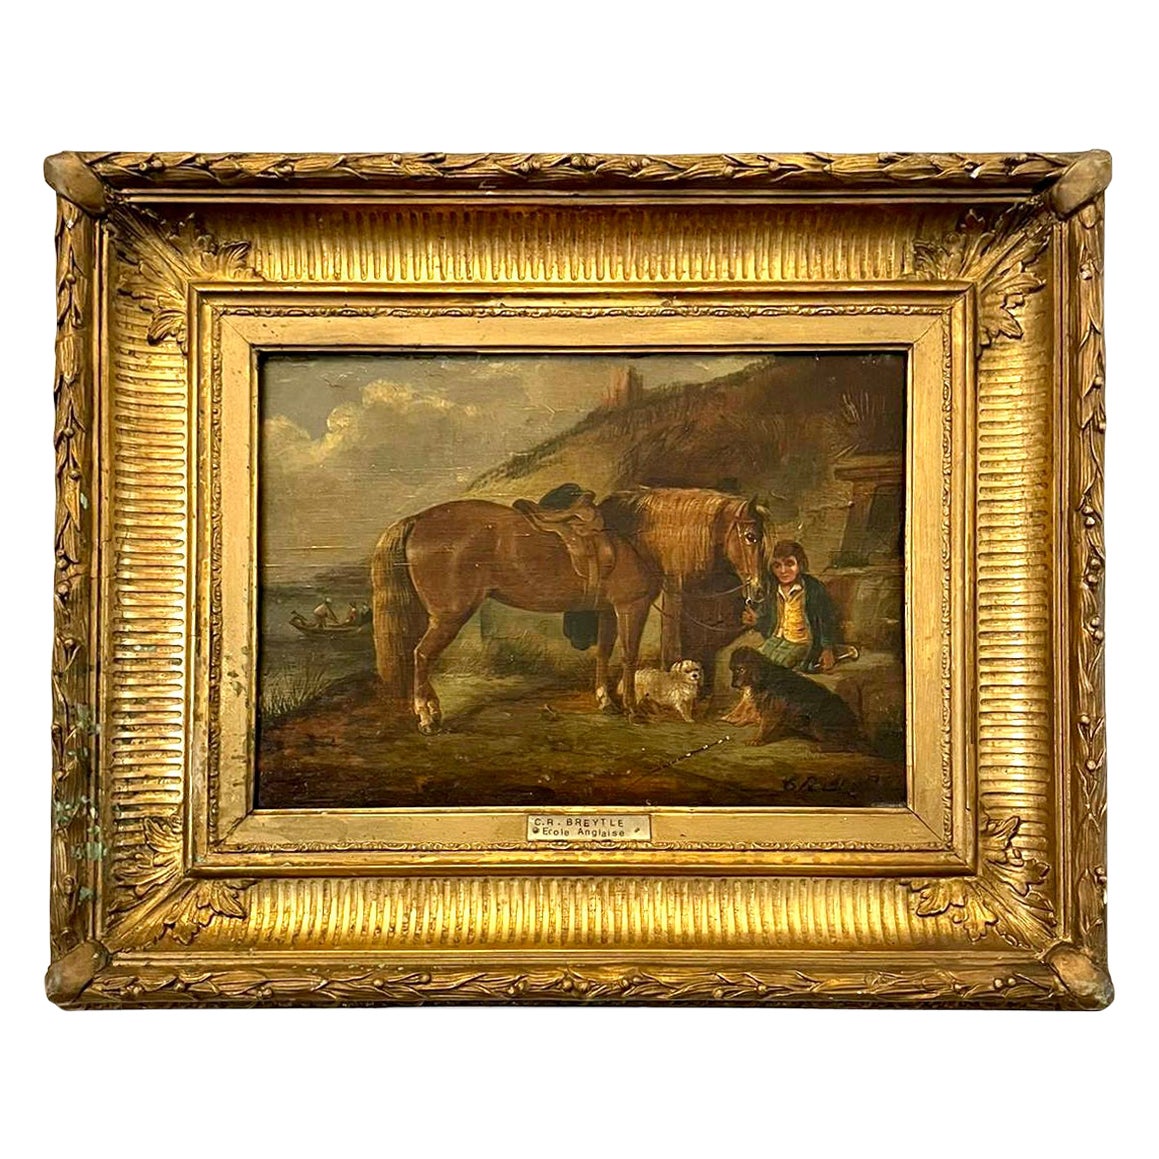 Antique Victorian Quality Oil Painting by C R Breytle 